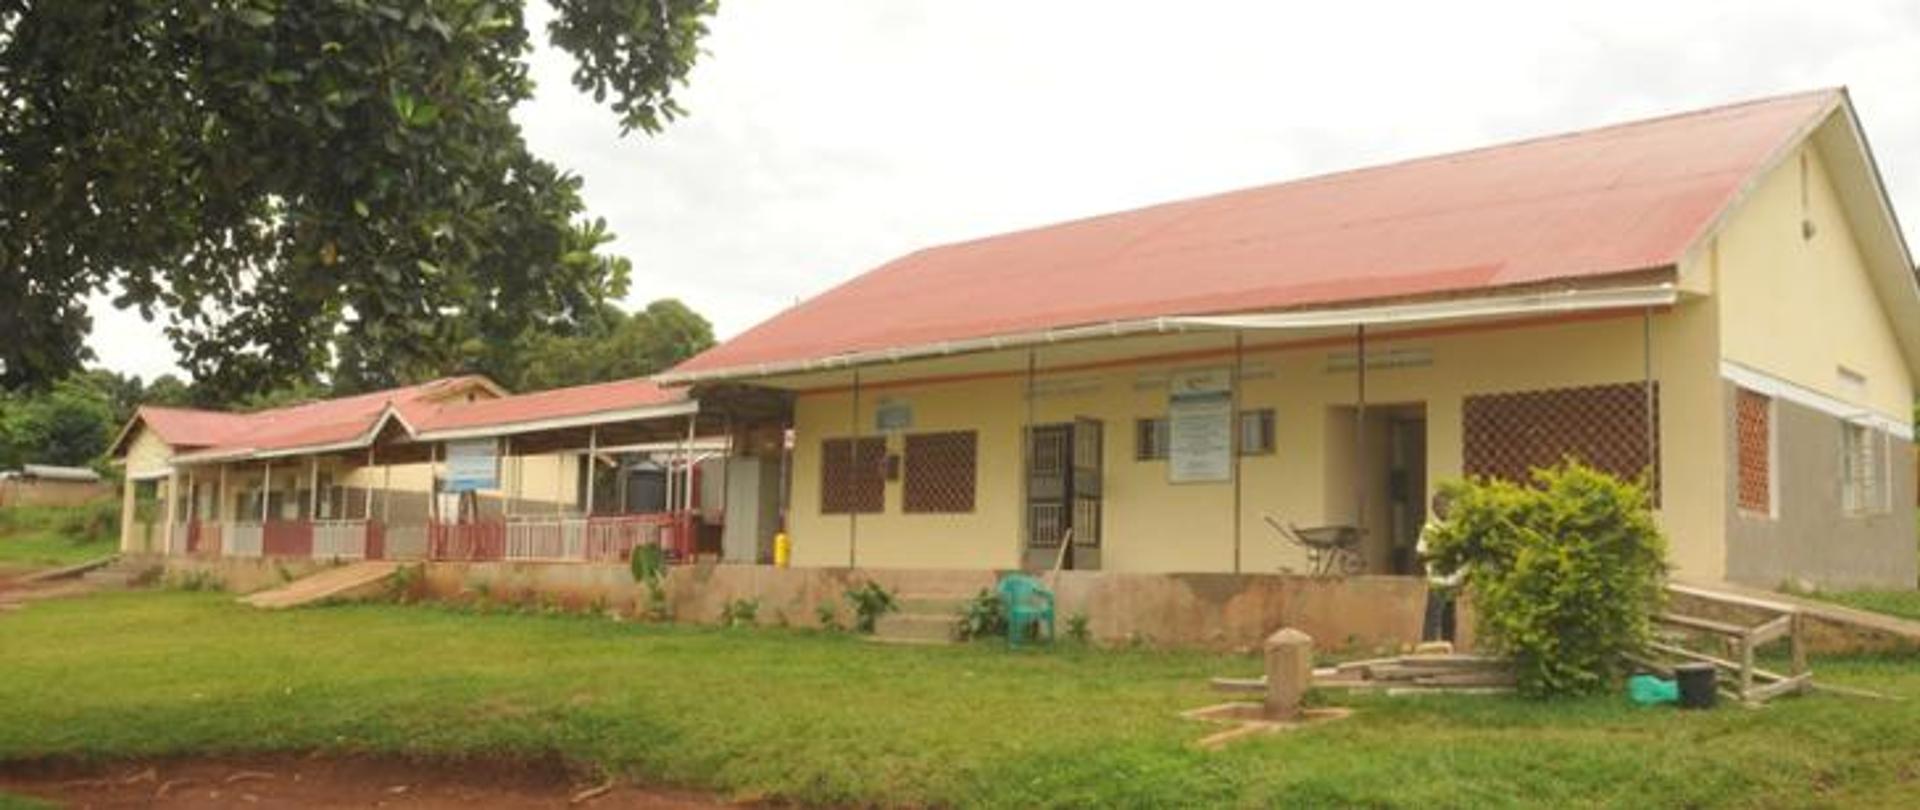 Support for the health centre in Koja – equipping the labour and maternity wards, renovating the clinic's buildings, and staff training
